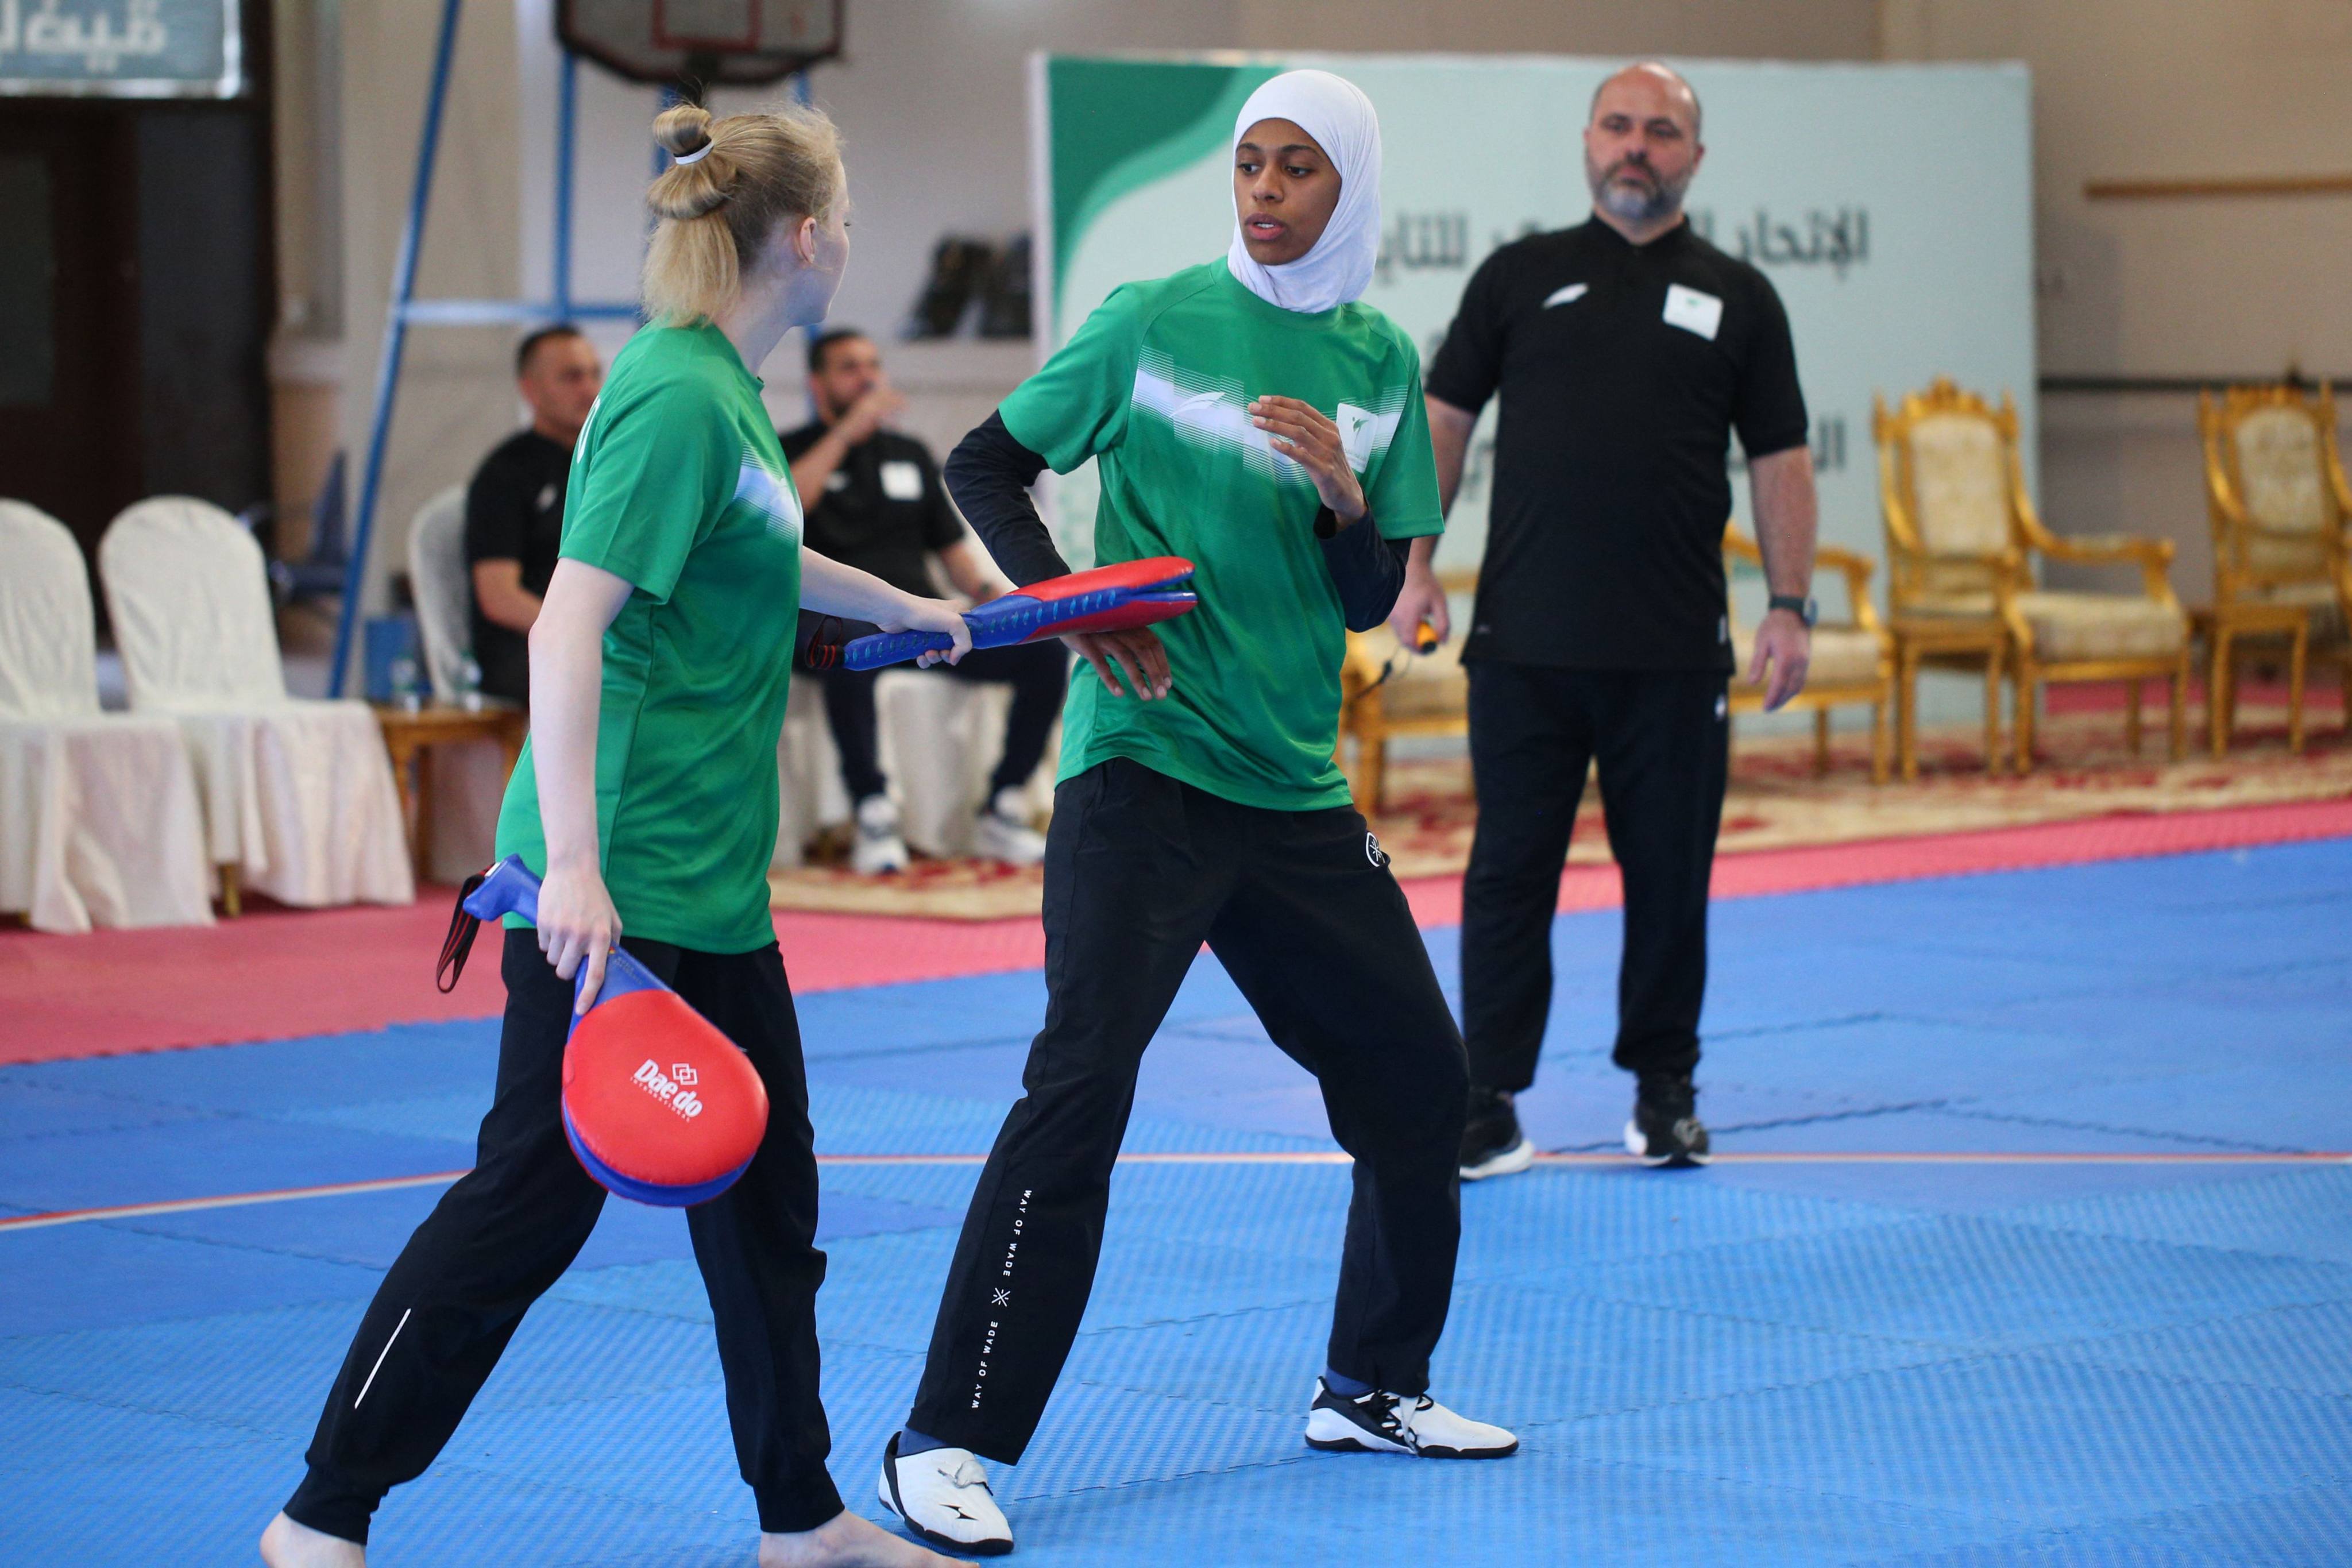 Taekwondo competitor Donia Abu Taleb is the first Saudi woman to qualify for an Olympic Games and hopes to be the first to win a medal. Photo: AFP